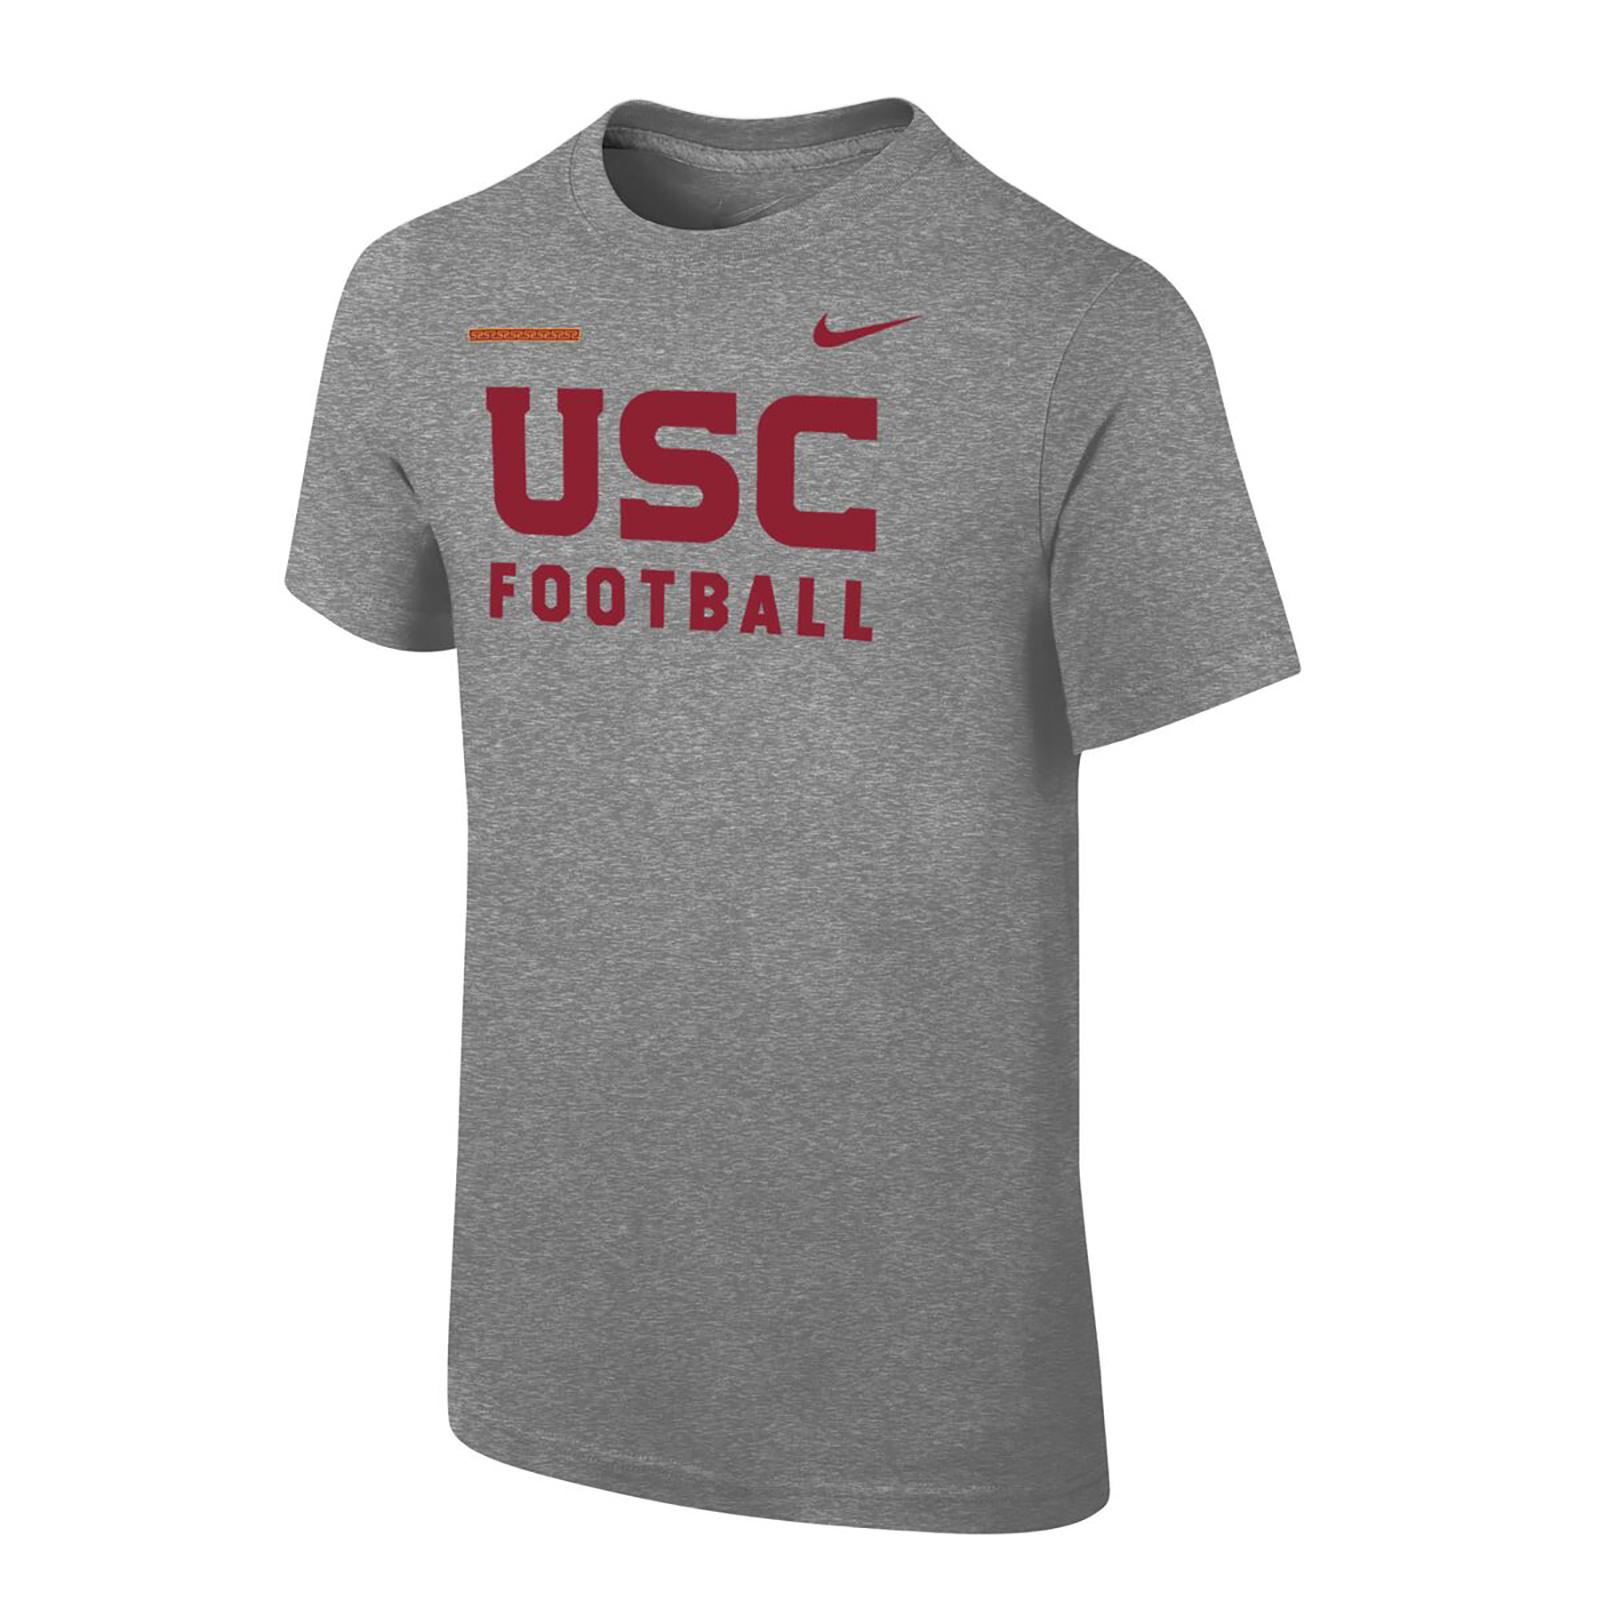 USC Arch Football Kids Facility SS Tee SP17 image01